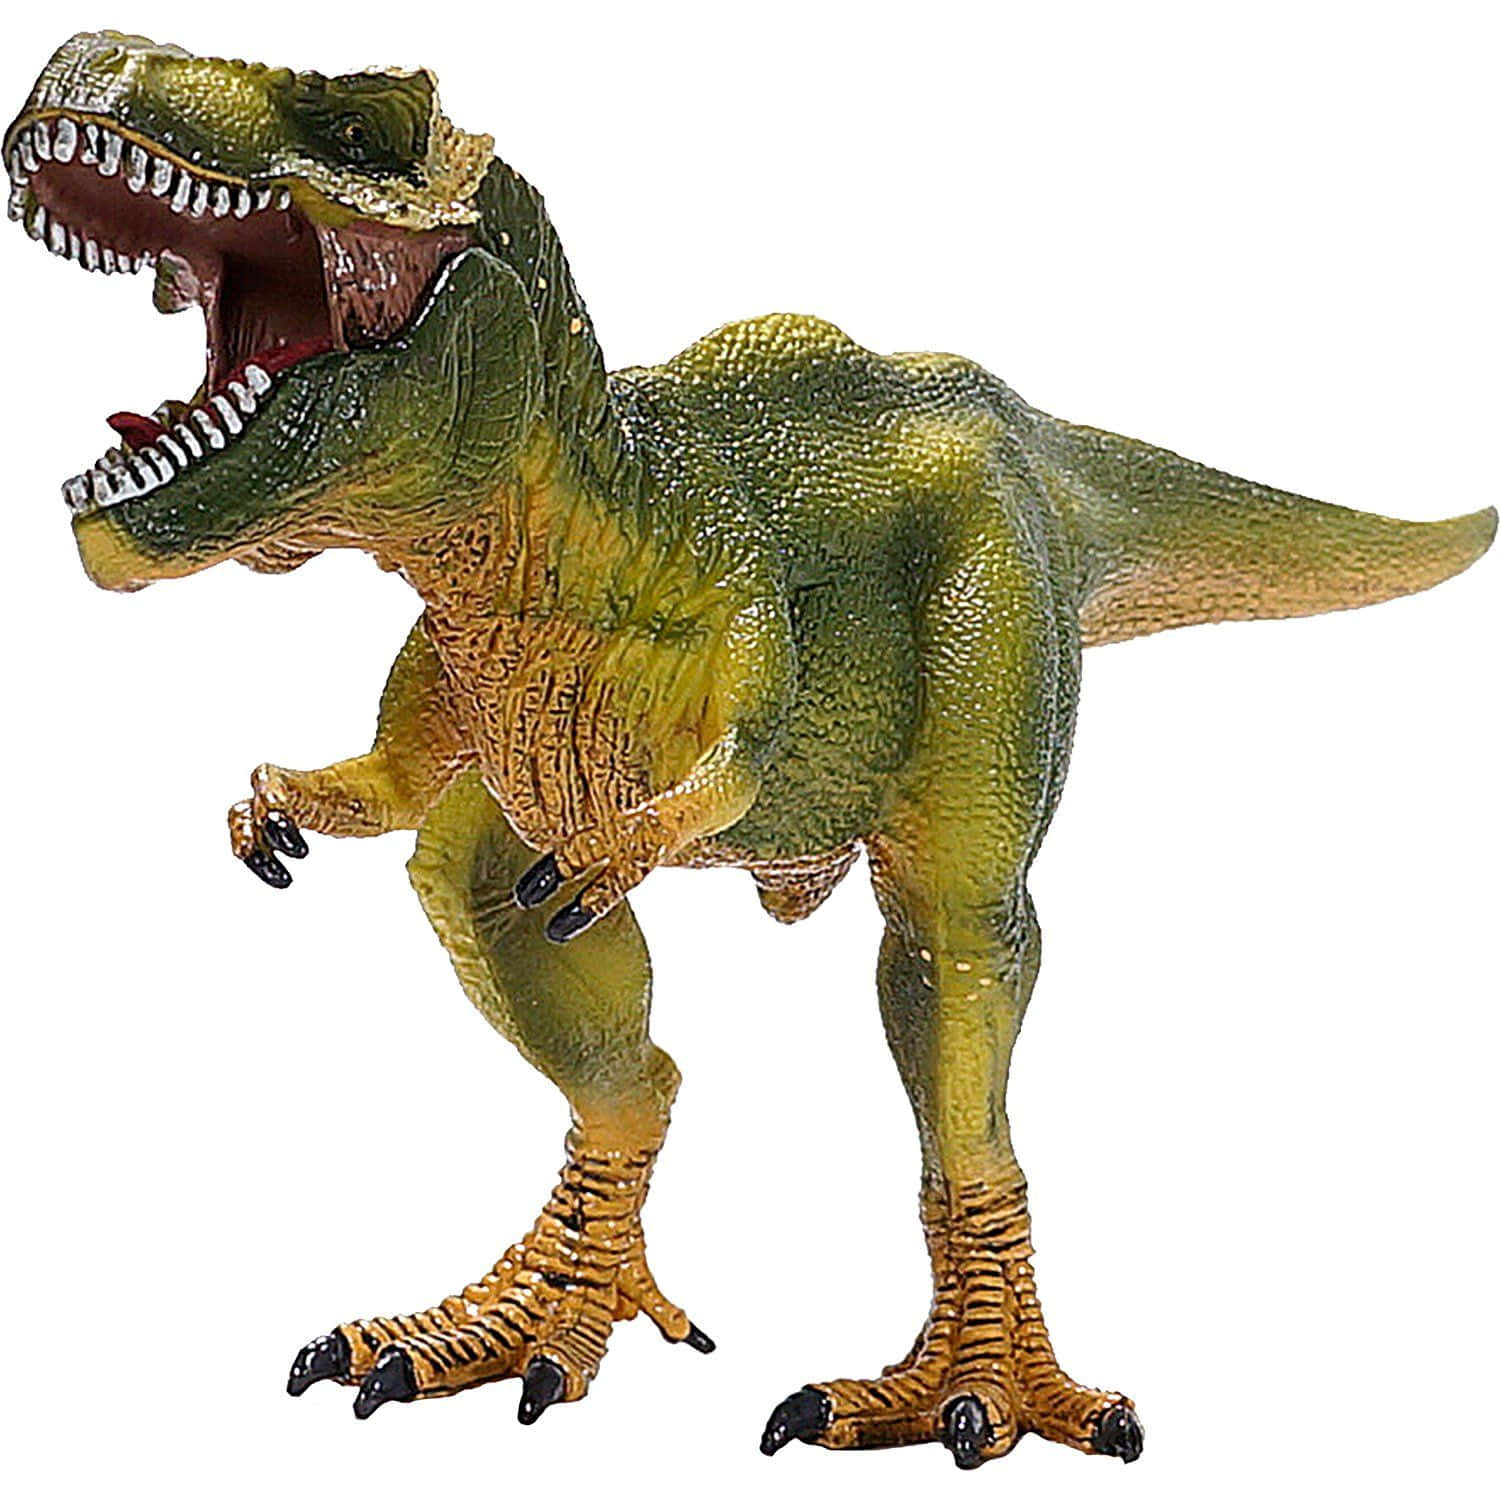 a toy t - rex with open mouth